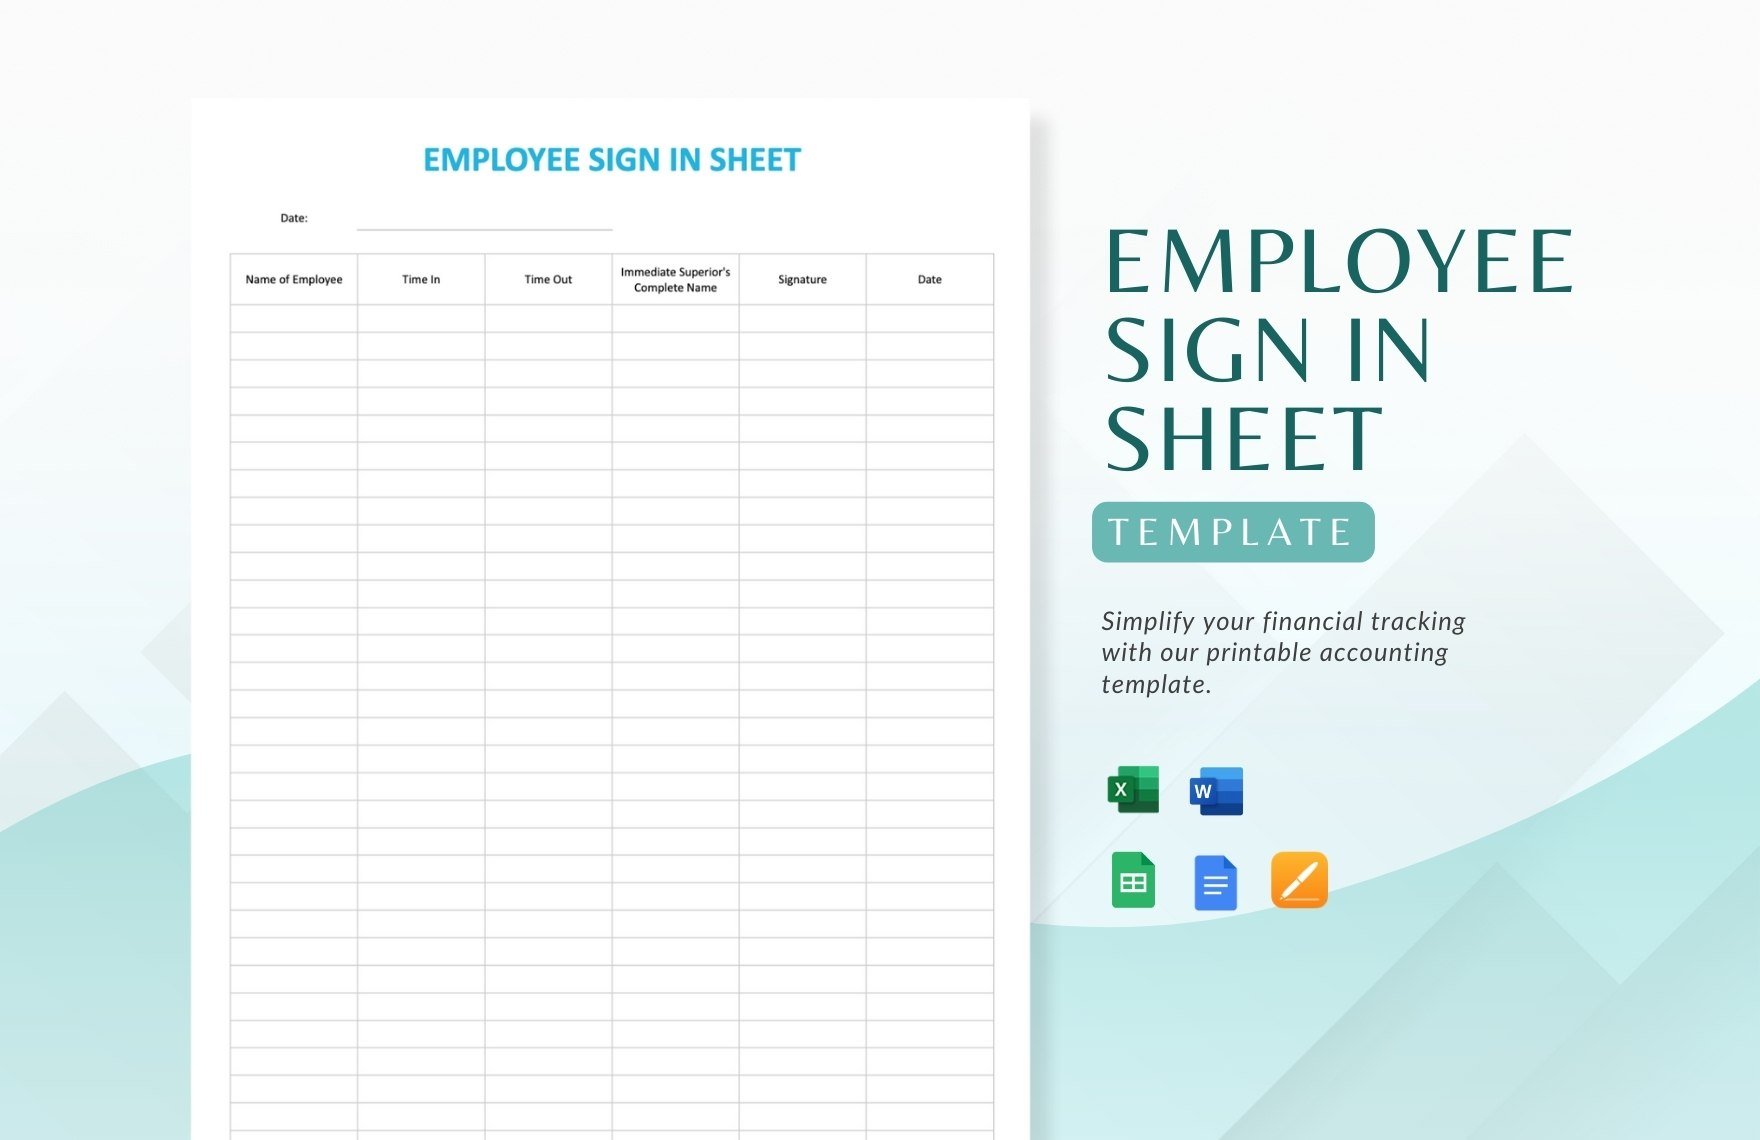 Restaurant Employee Sign In Sheet Template in Word, Google Docs, Excel, Google Sheets, Apple Pages